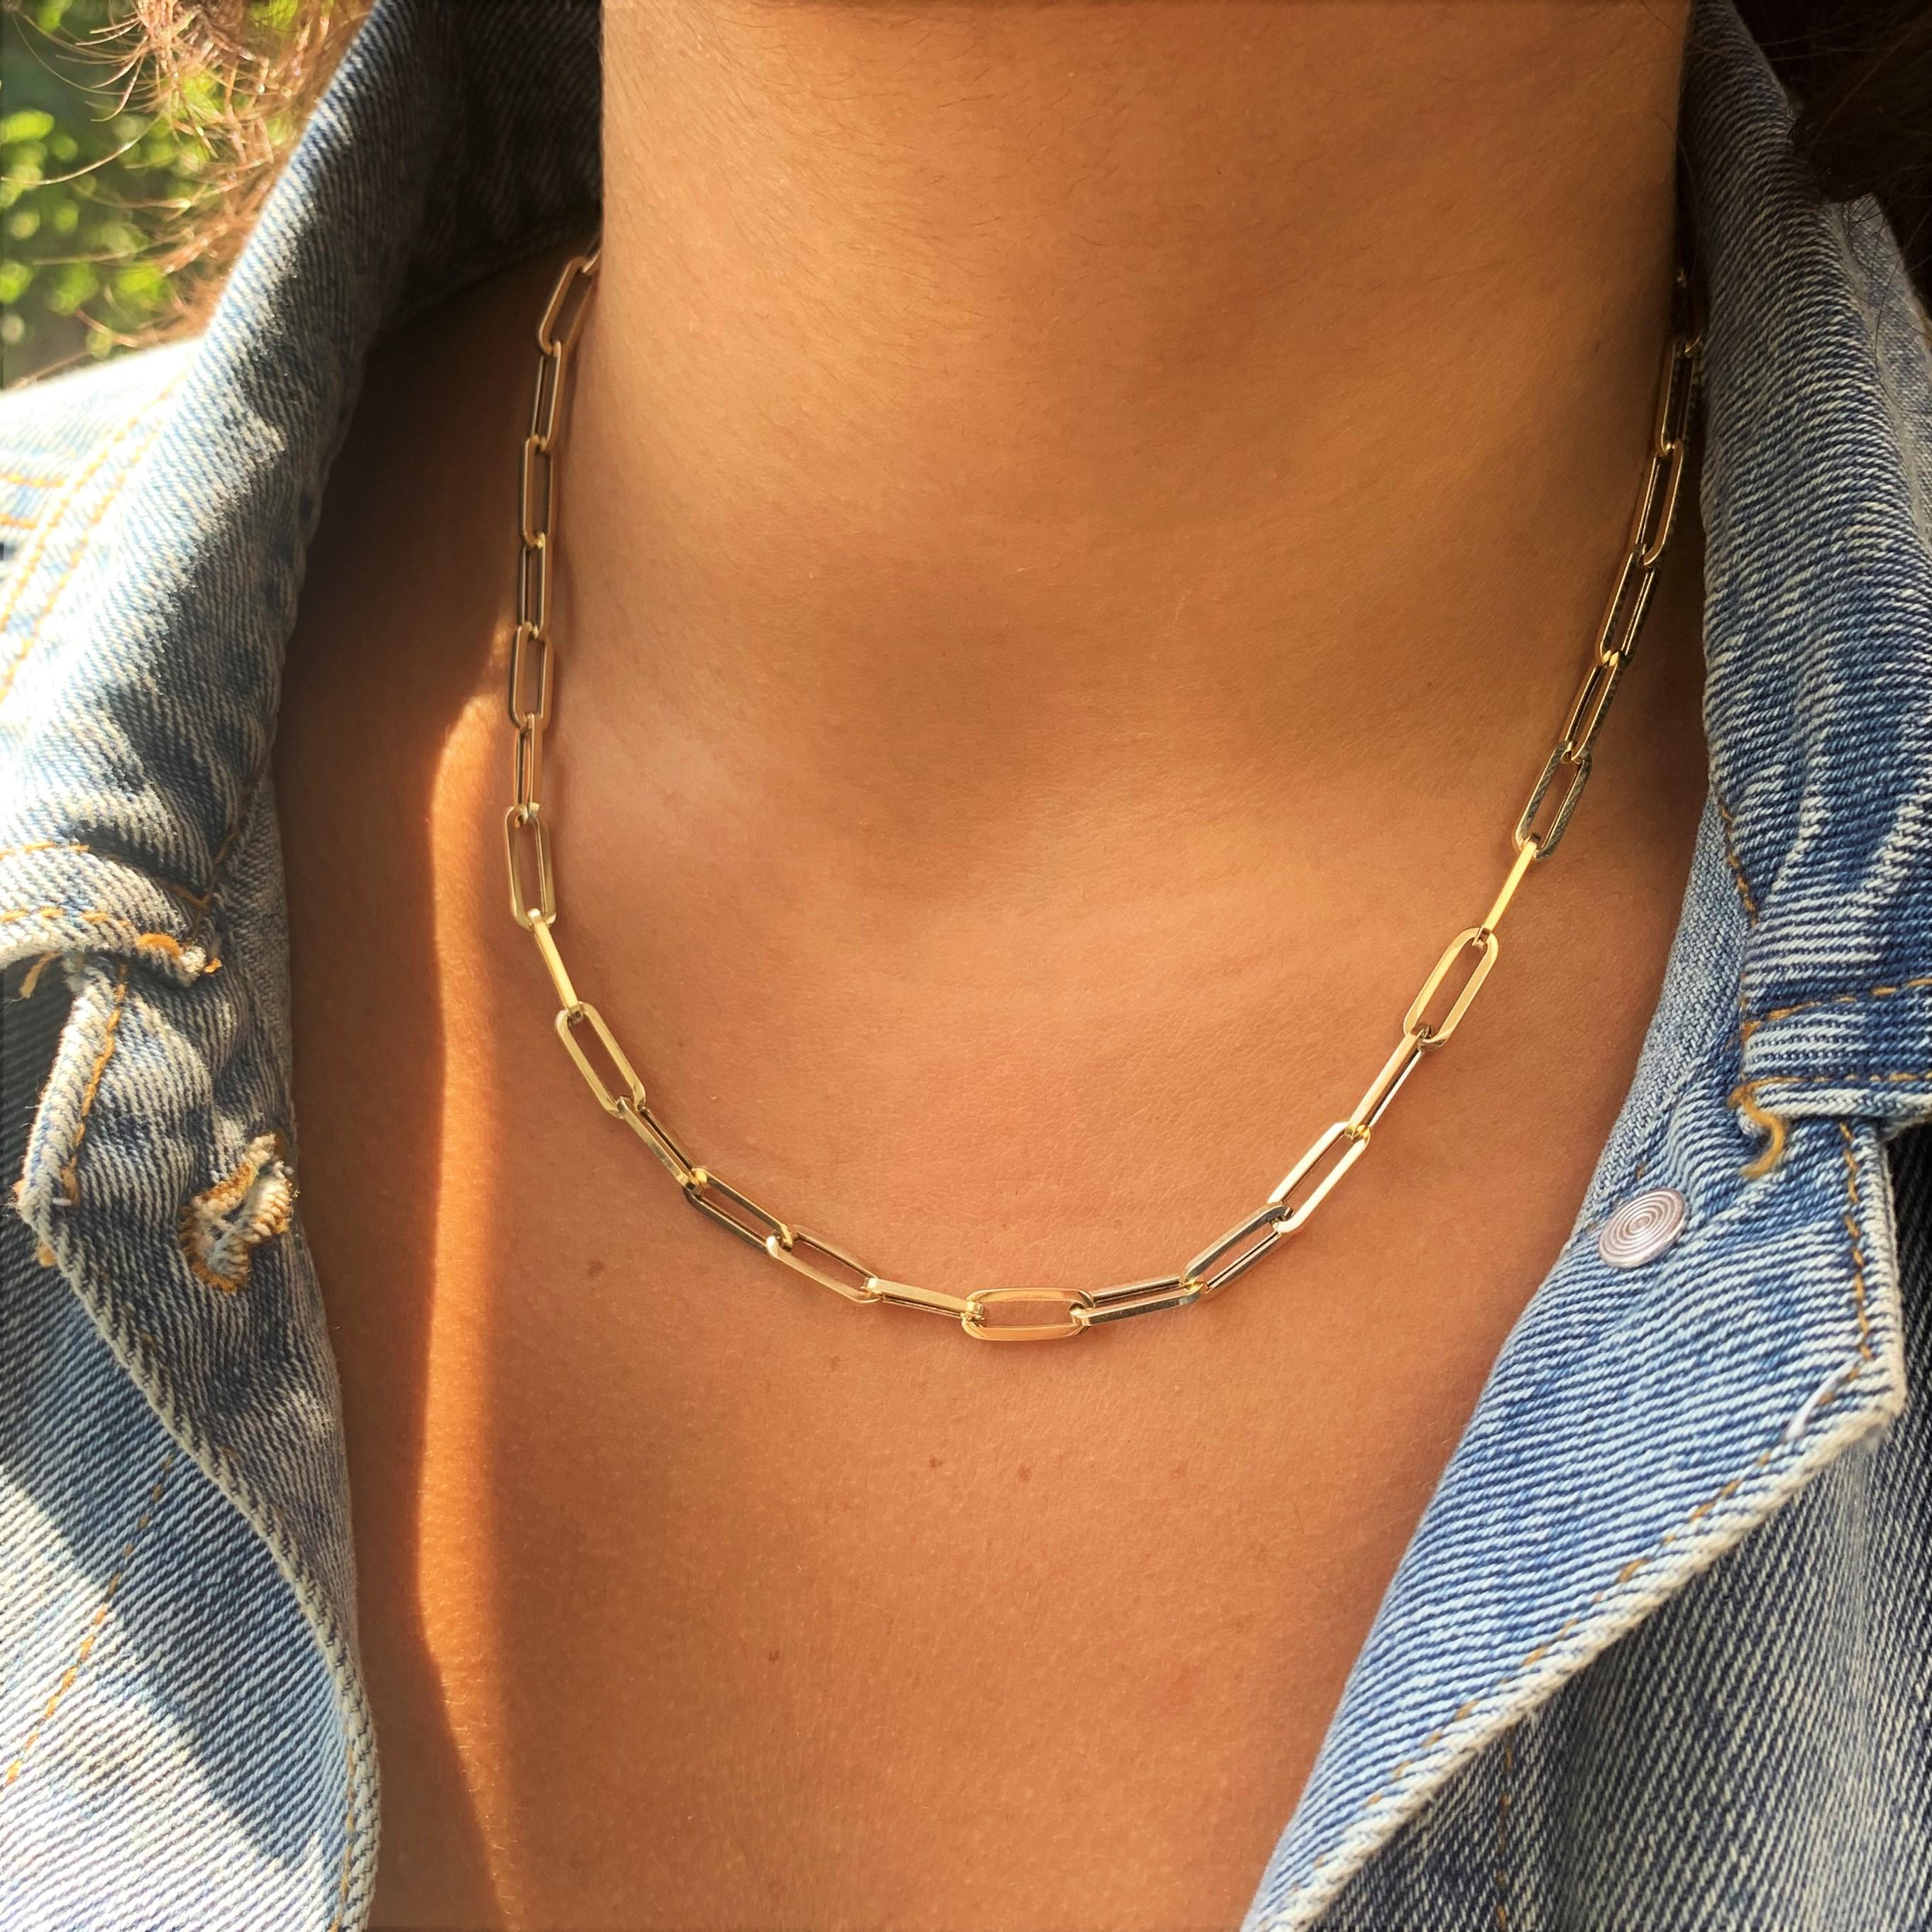 These Classic yet Trendy Paperclip Gold necklaces are a classic staple in any person's jewelry box! This 14K Yellow Gold paper-clip medium link chain comes with plenty of options, specifically your choice of length. Buy one and wear it as a simple